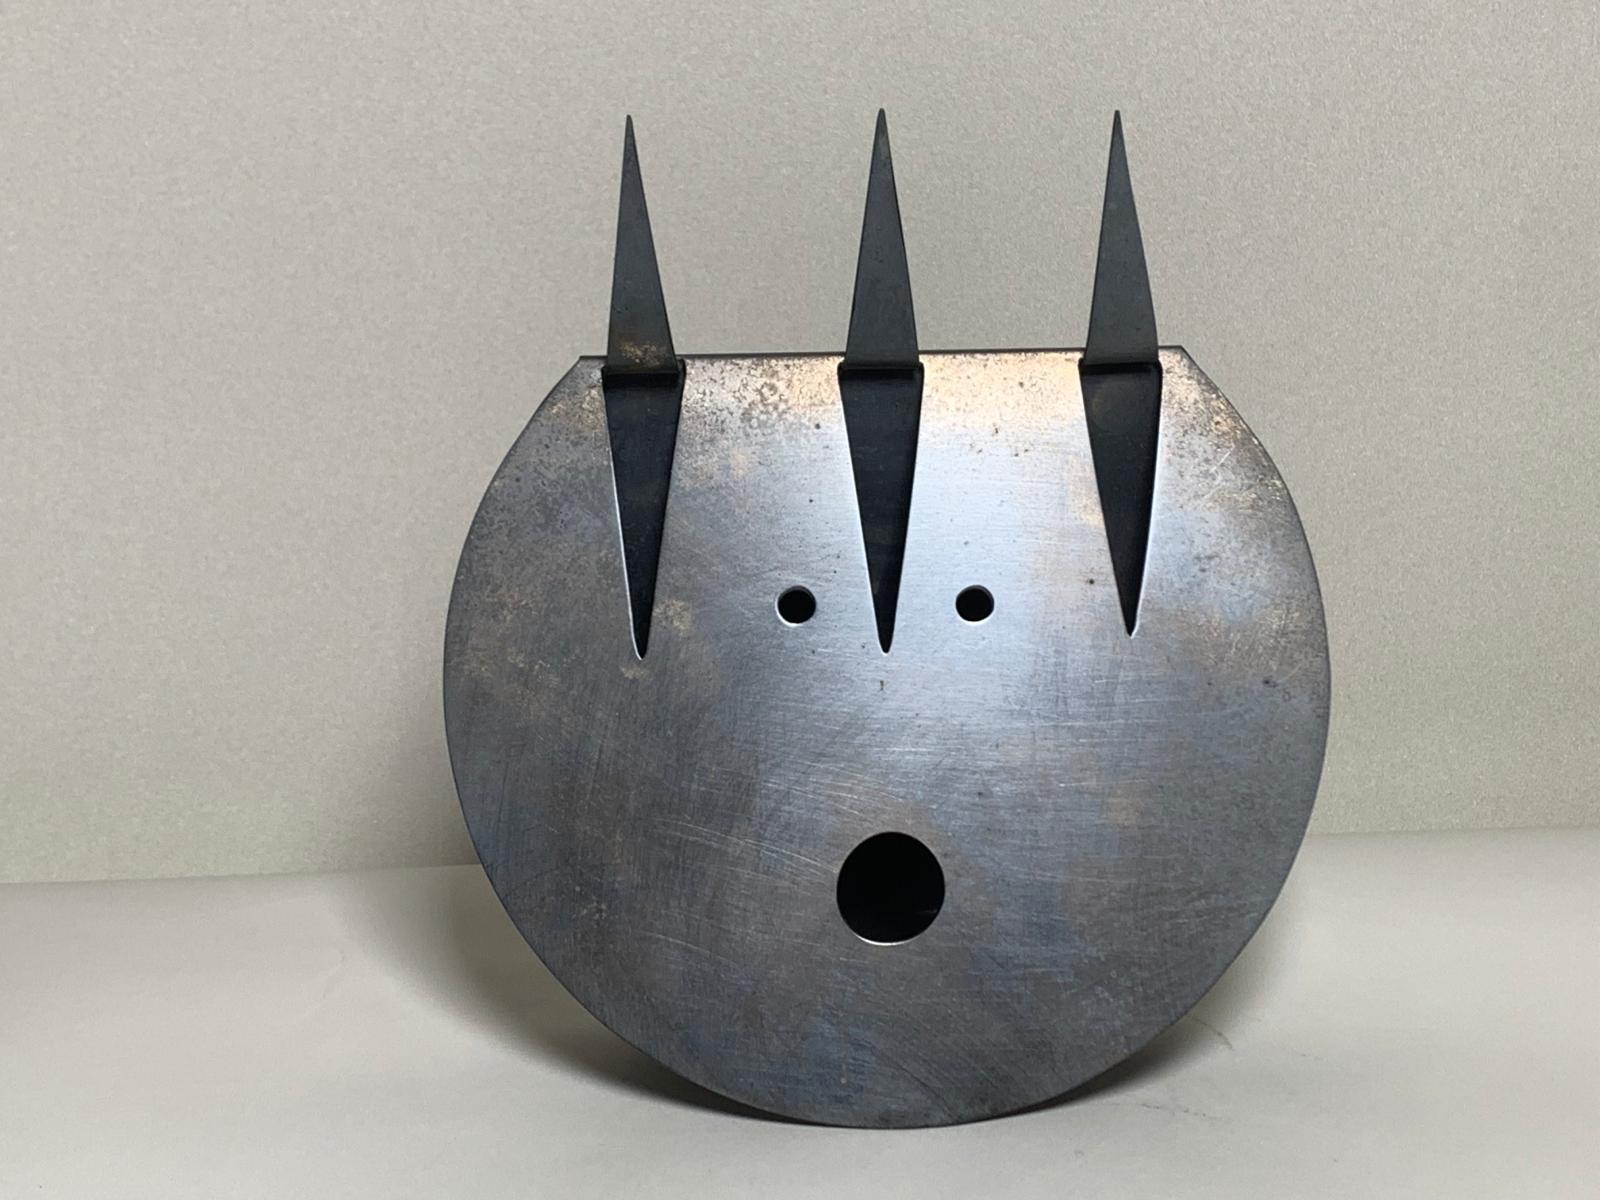 Sculpture depicting the devil designed by Gio Ponti and created by Lino Sabattini in 1978 in hallmarked silver metal.

Biography
Architect, designer and artist, Gio Ponti (Milan 1891-1979) graduated in Milan in 1921 and initially associated with